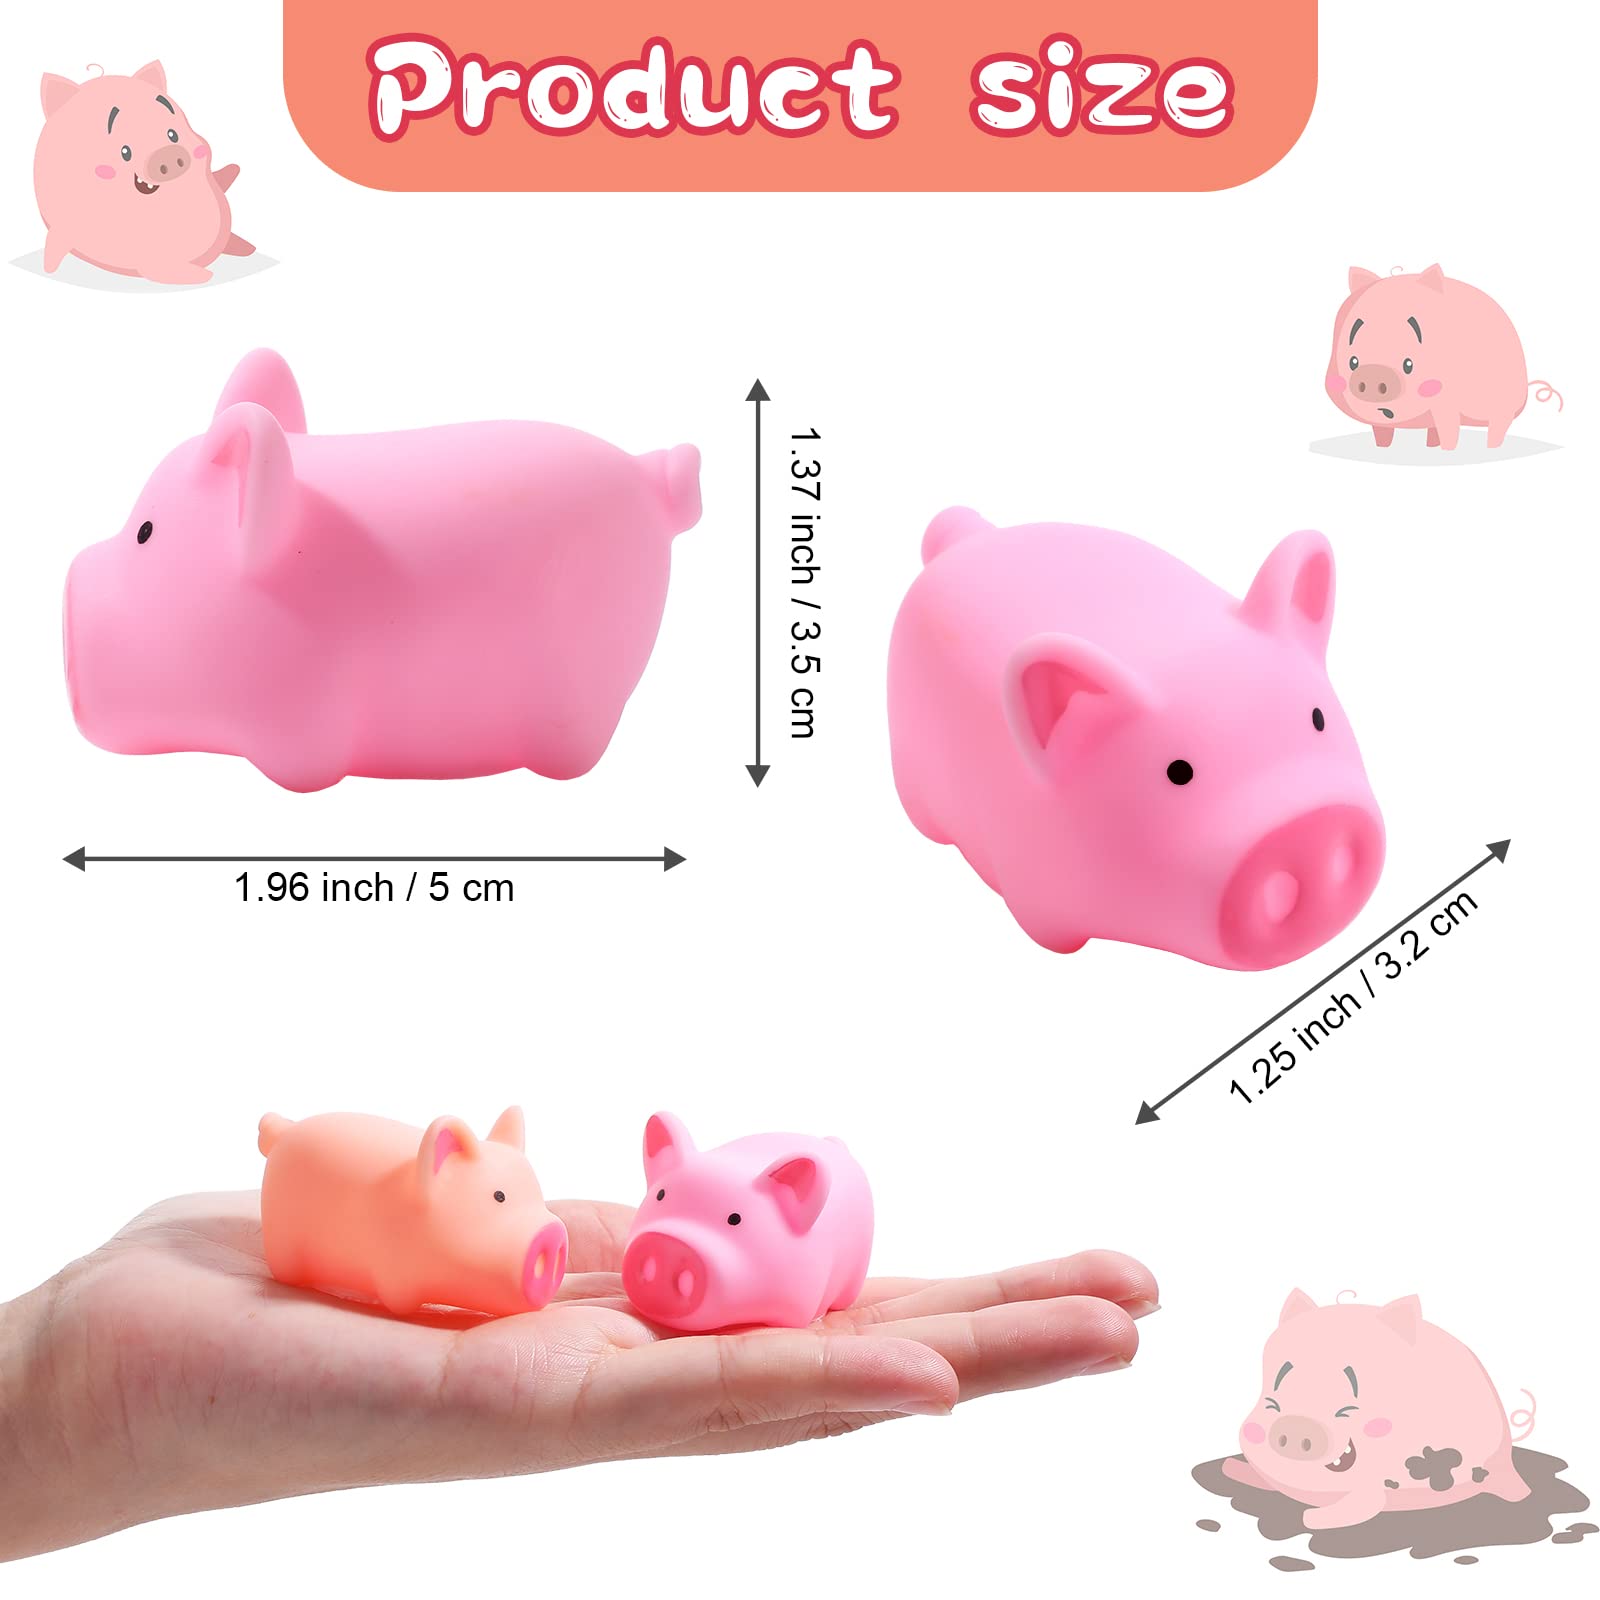 100 Pieces Mini Rubber Bath Pig Float Pigs Mini Rubber Pigs Bulk Rubber Piggy Bath Toys for Pig Themed Baby Shower Birthday Party Favors, Nude Color, Pink (Nude Color, Pink, Pig)